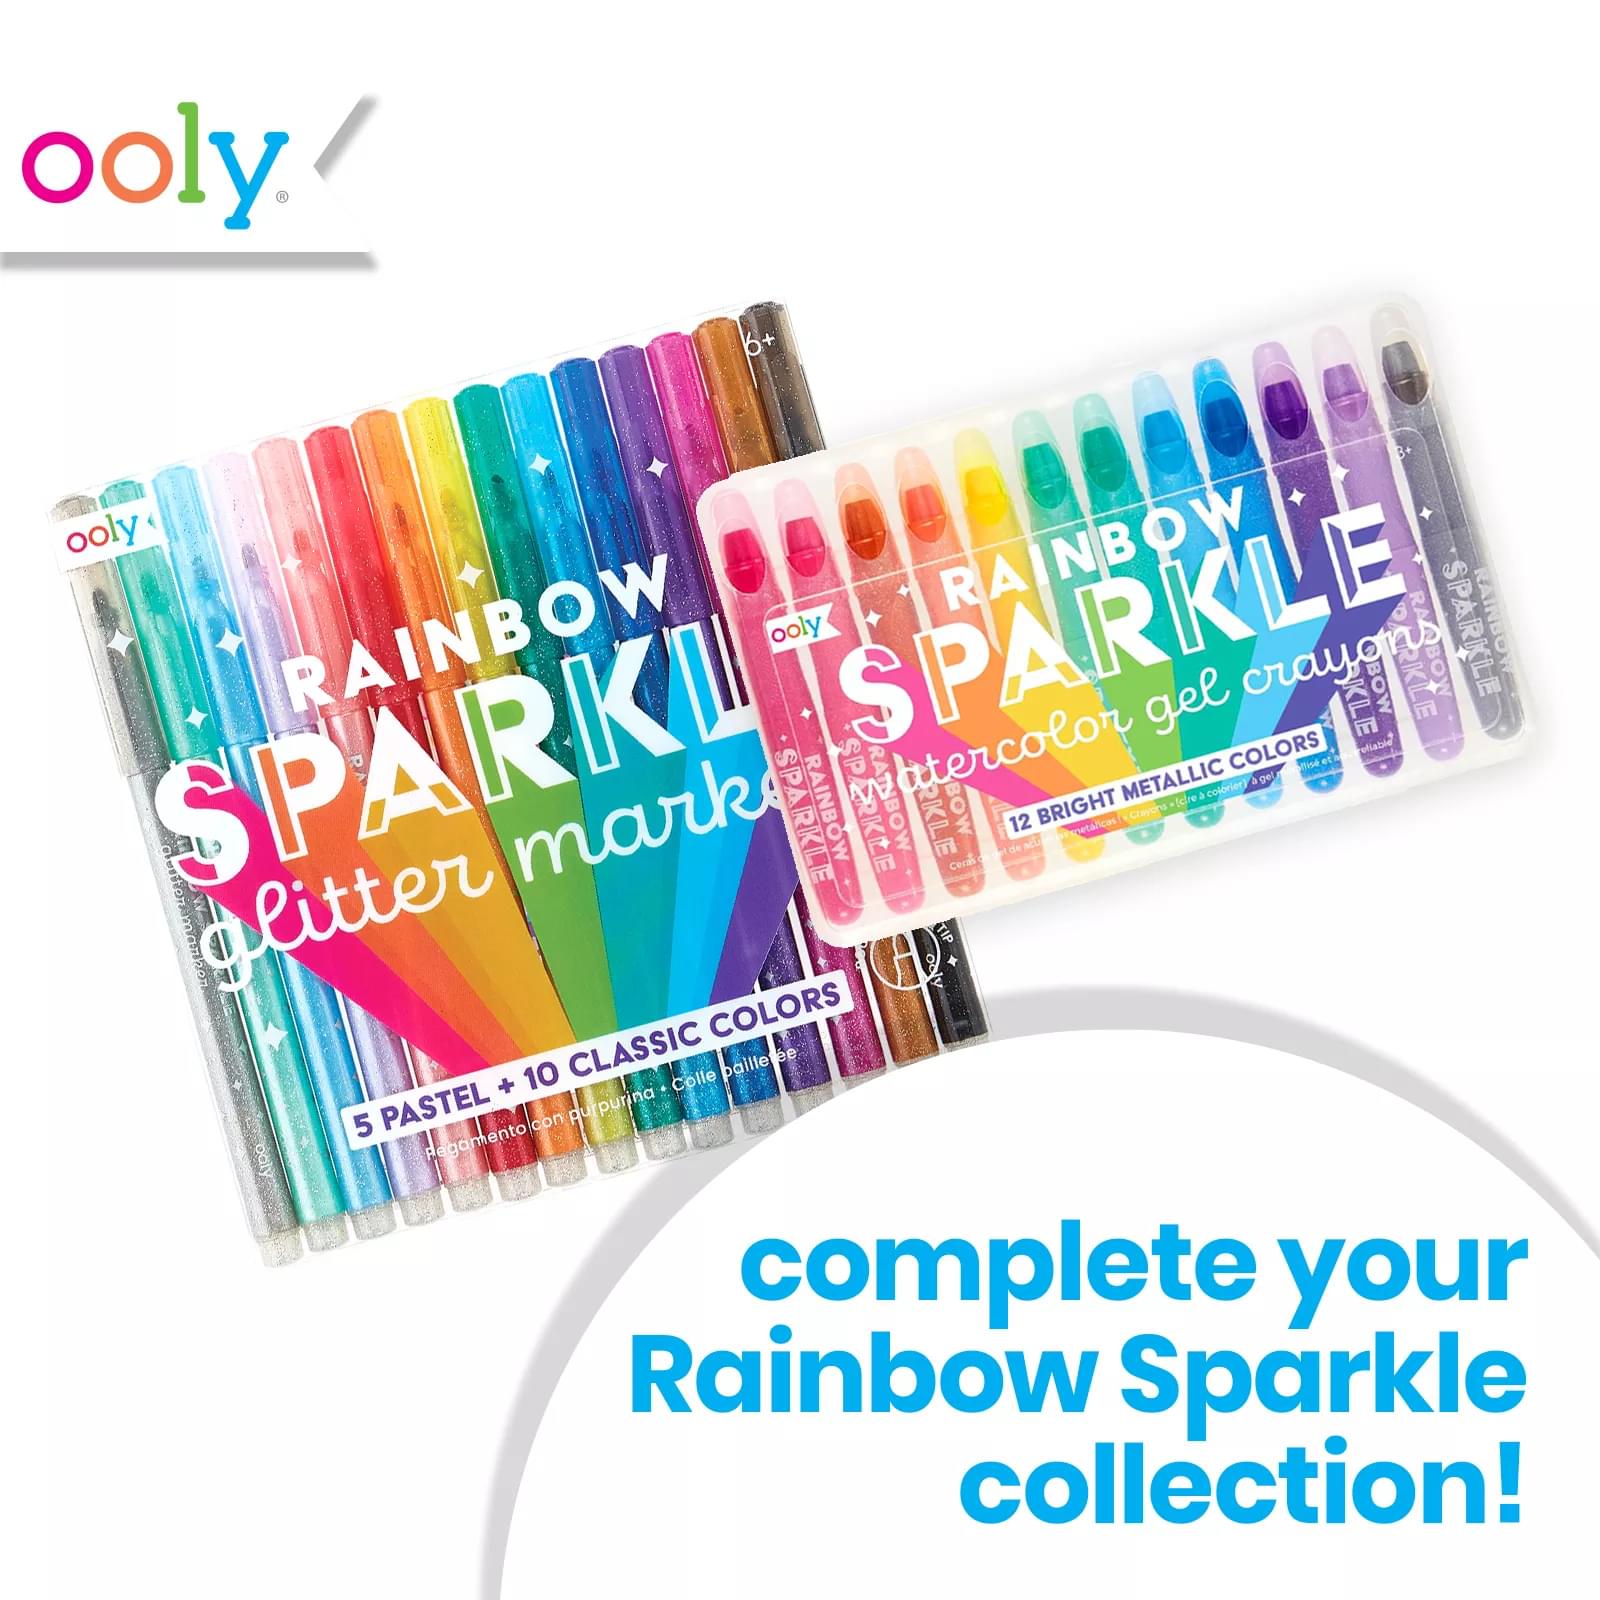  Ooly Rainbow Sparkle Glitter Markers [Set of 15